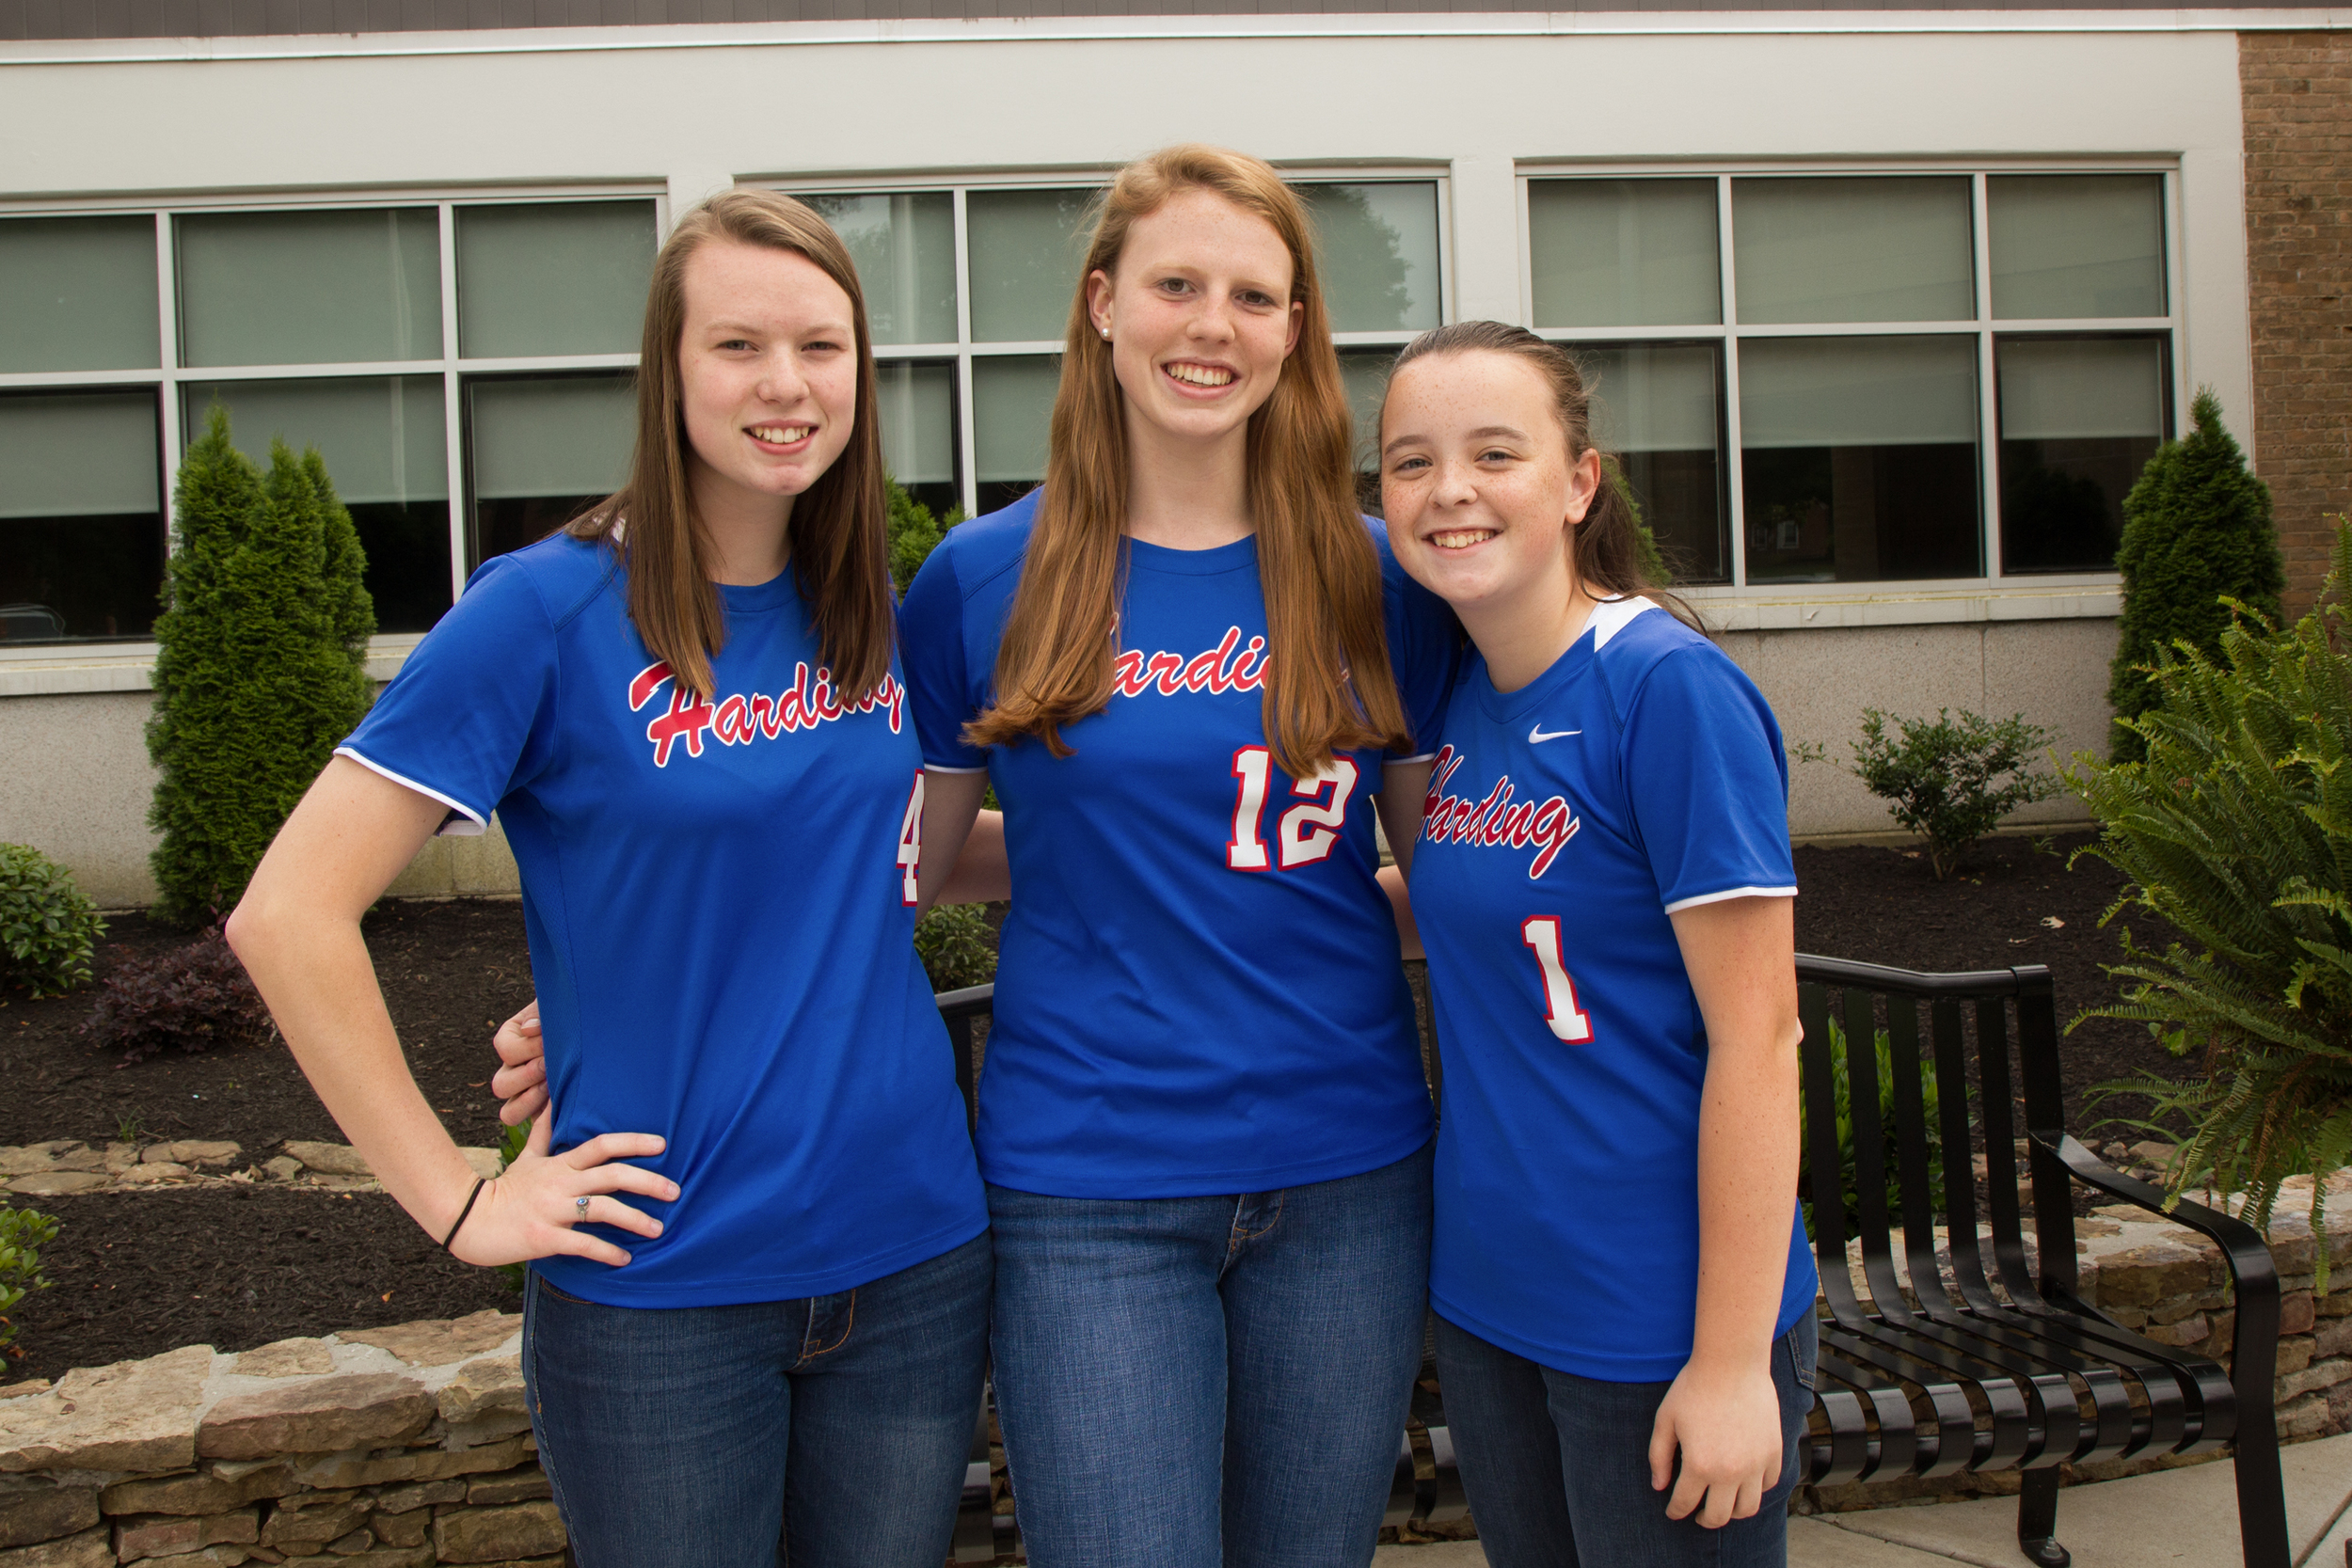 Congratulations to the following varsity softball players who were named to the 2015 All-District Team (L-R) Kelsi Elkins, Kayley Underwood, Sarah Coleman, and Grace Thurmond (not pictured).&nbsp; Honorable mention went to Emily Coleman and Melissa …